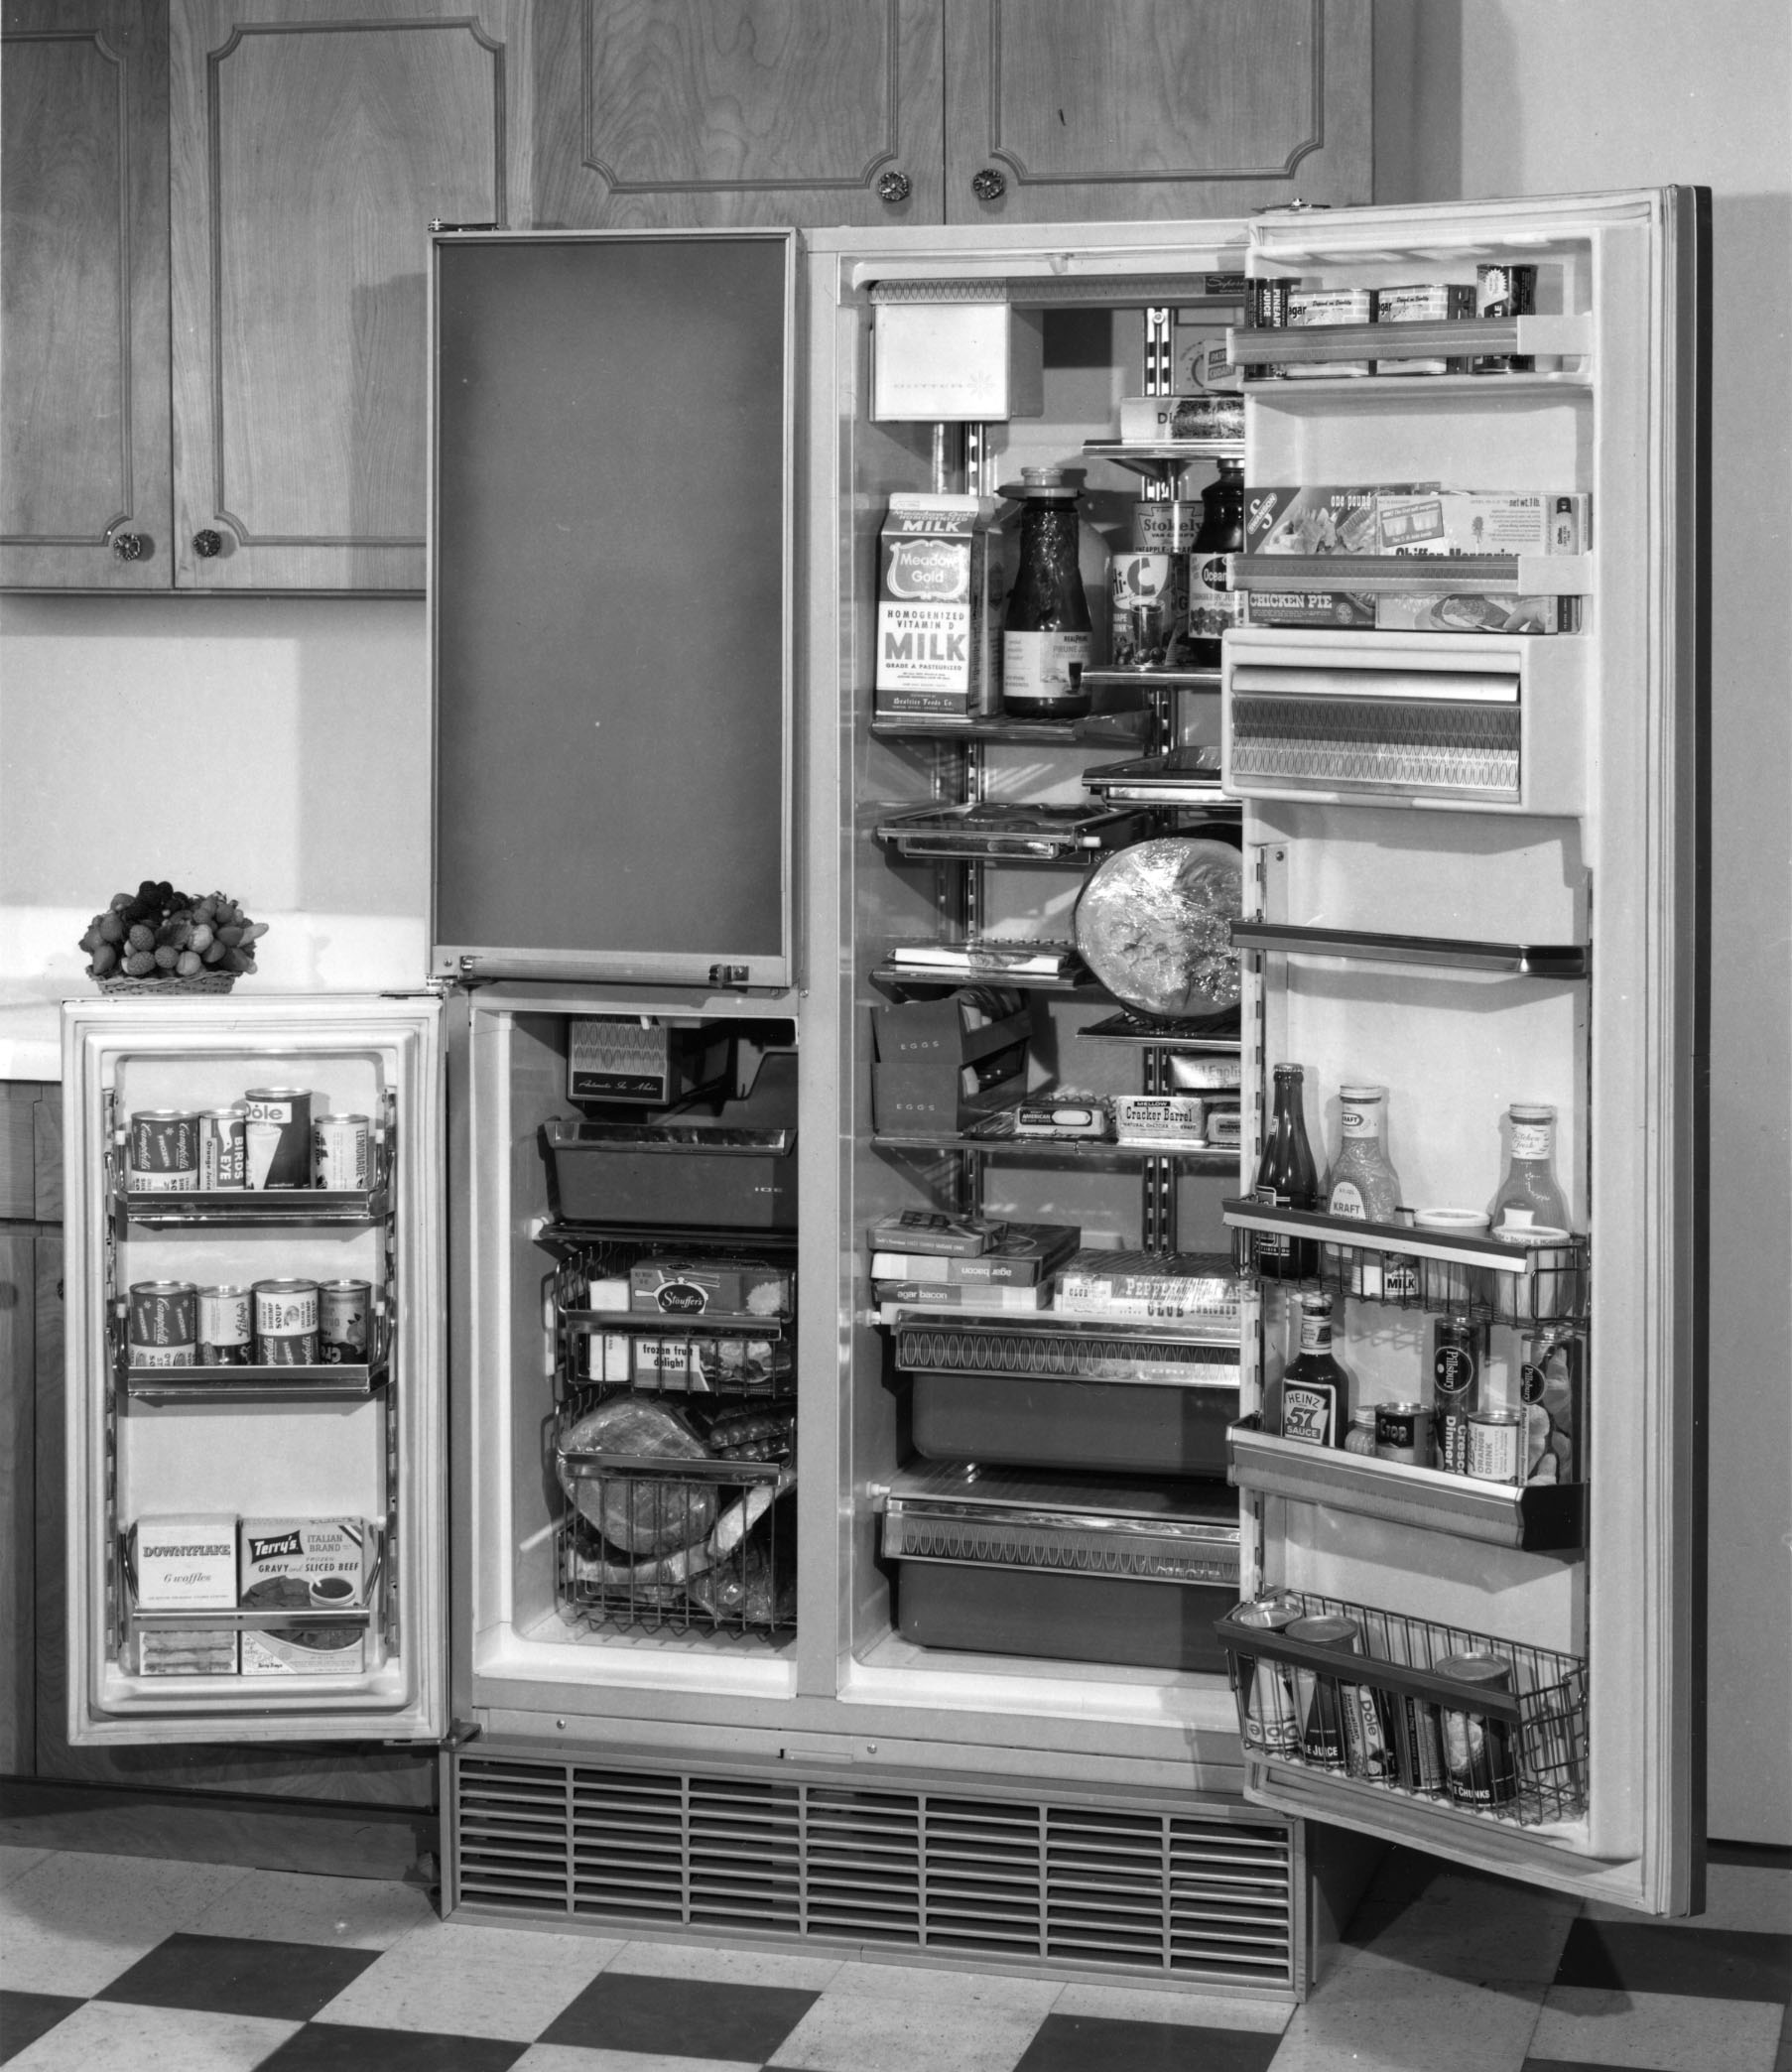 Look at all that food! - Shopping Hints #103, Item #2, Convertible Refrigerator. Product News, 4/7/1967. [Medical World News Collection, McGovern Historical Center, IC077, Folder 94.38]